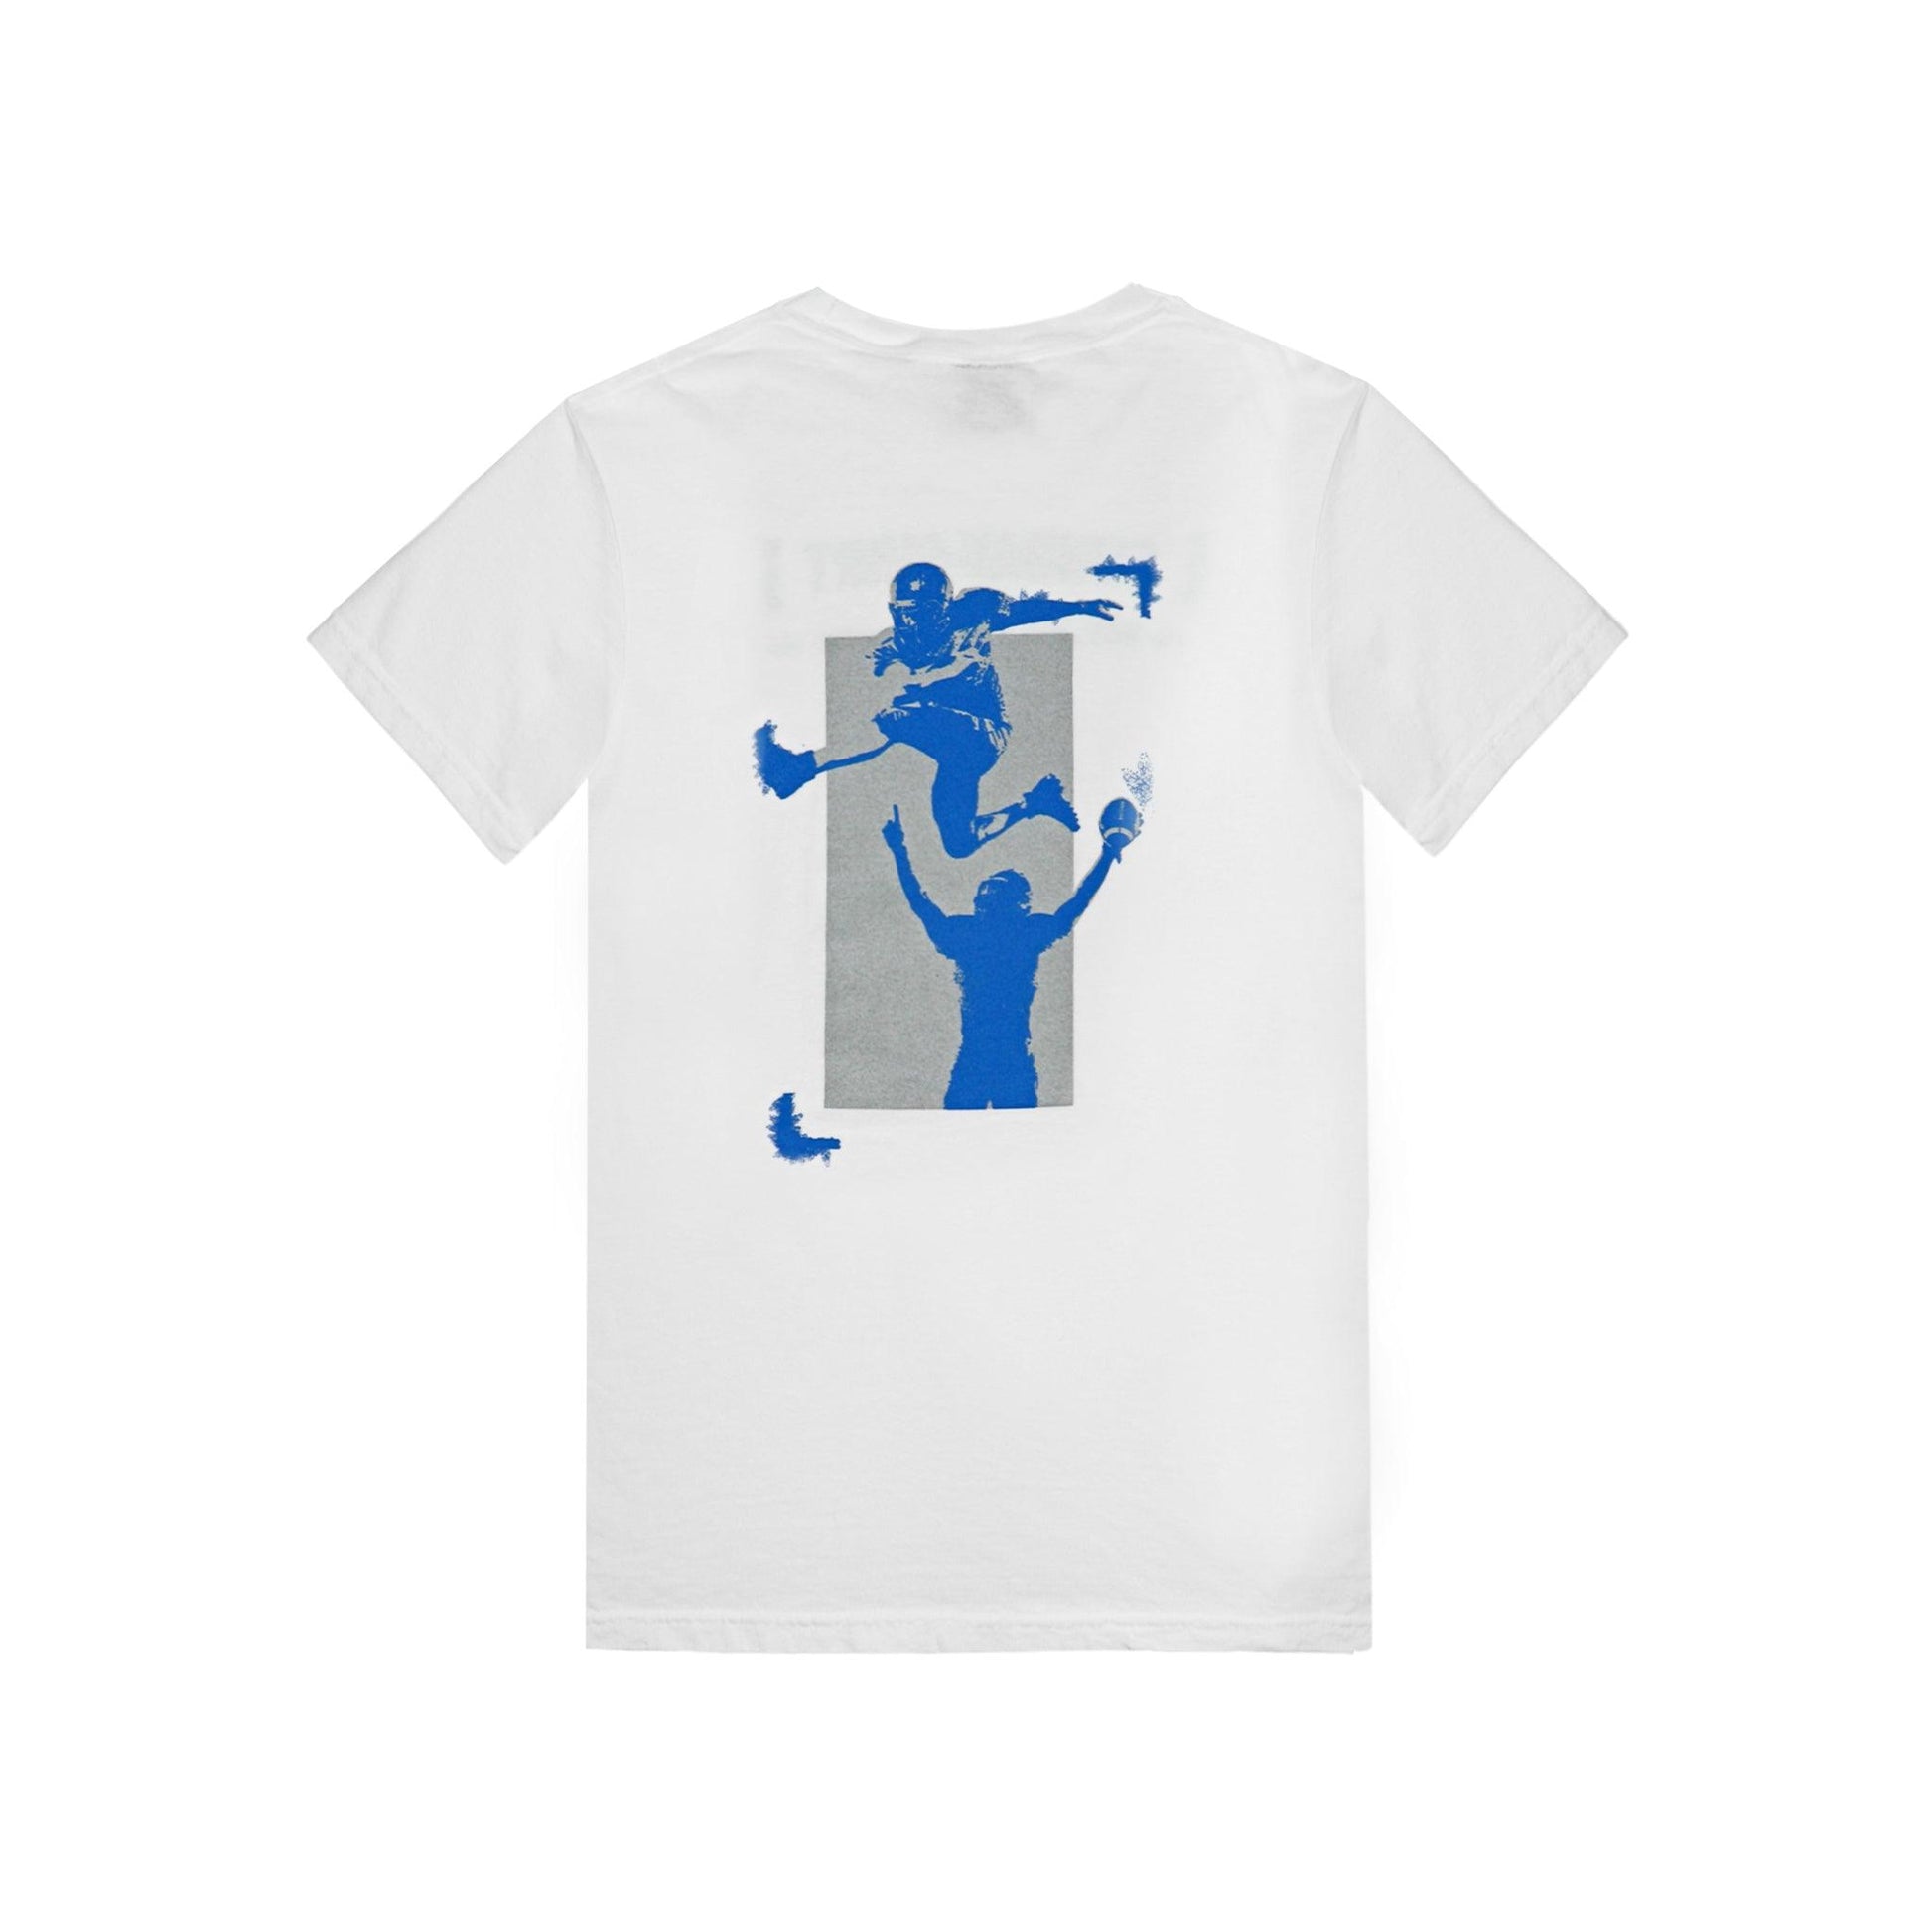 Back view of shirt, 2 football players, one hurdling another